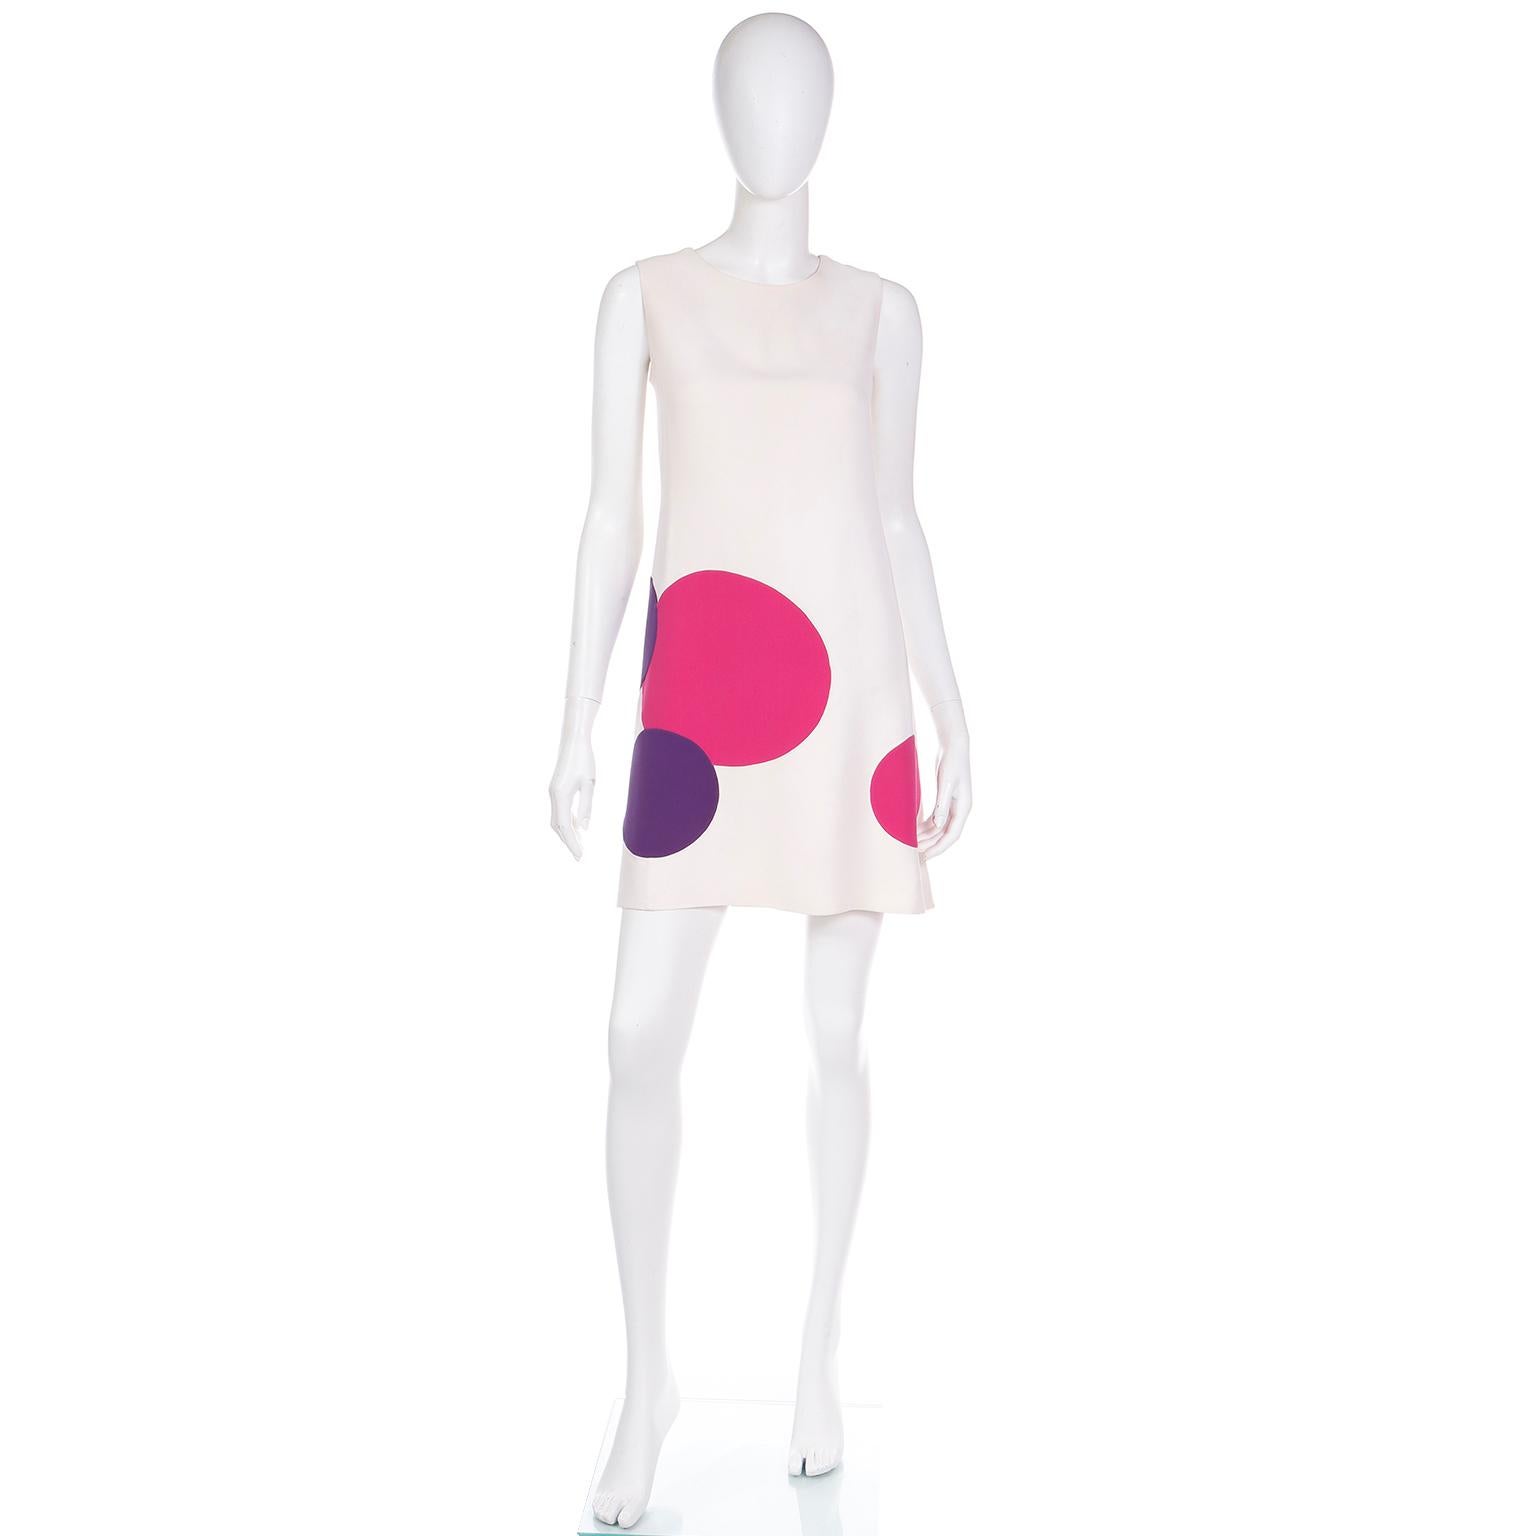 This is a rare vintage 1970's Mila Schon creamy ivory shift dress with giant pink and purple circles or dots. This medium weight double faced silk dress is sleeveless with a round neckline and it closes with a centered back zipper. This is such a